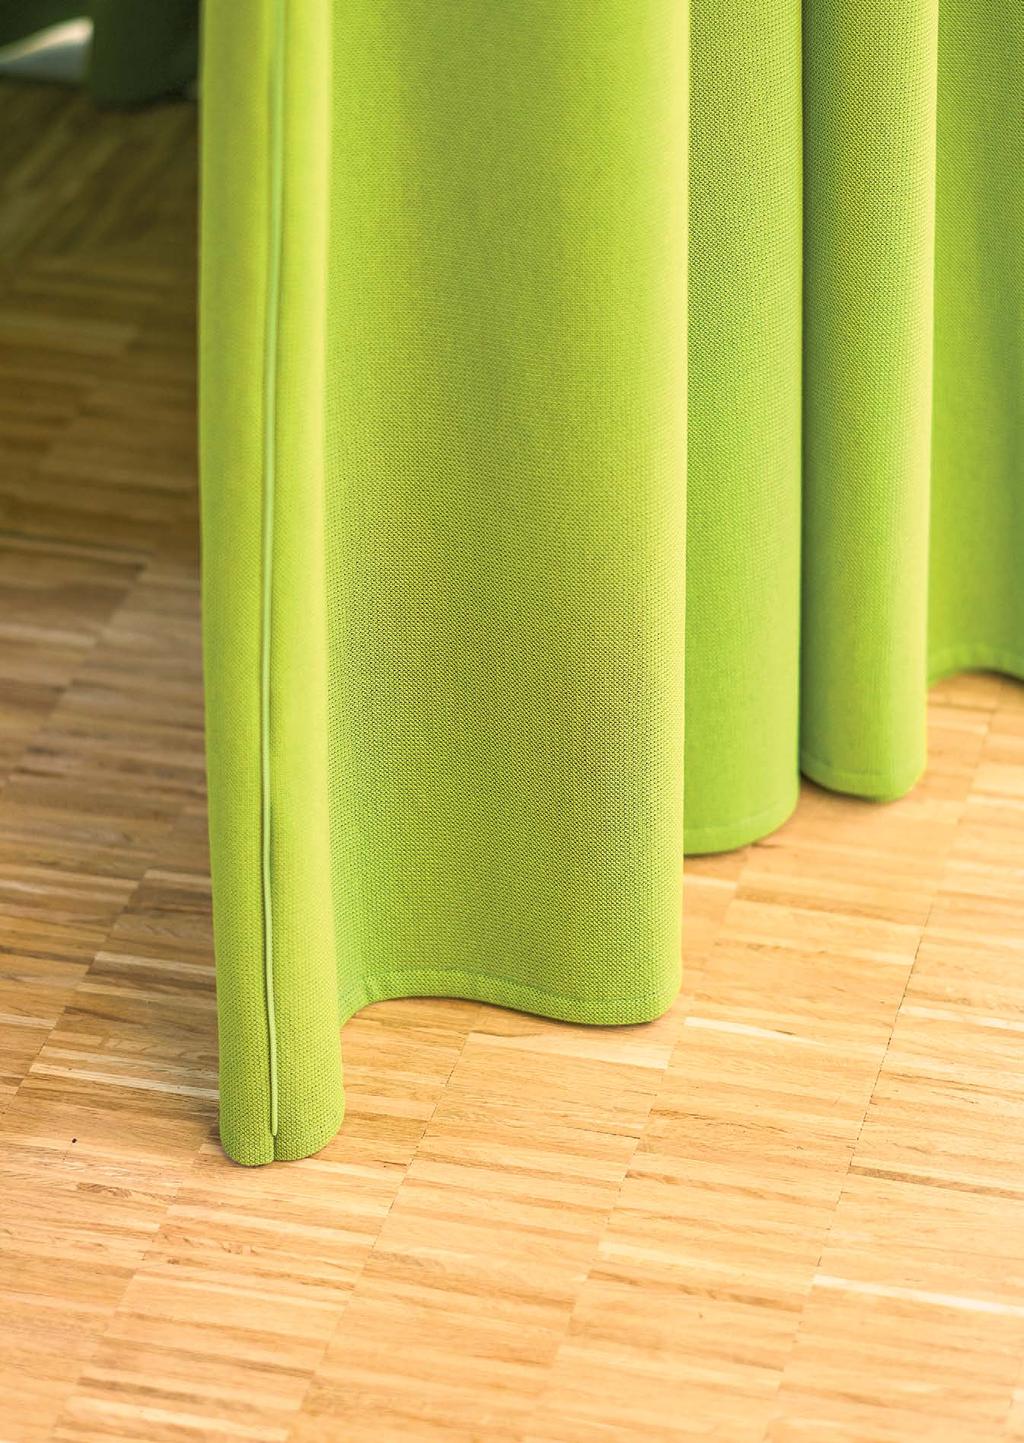 Vibrasto acoustic curtains Vibrasto acoustic curtains may be joined together thanks to the zips inserted into their side seams, making them adaptable to spaces of all dimensions.